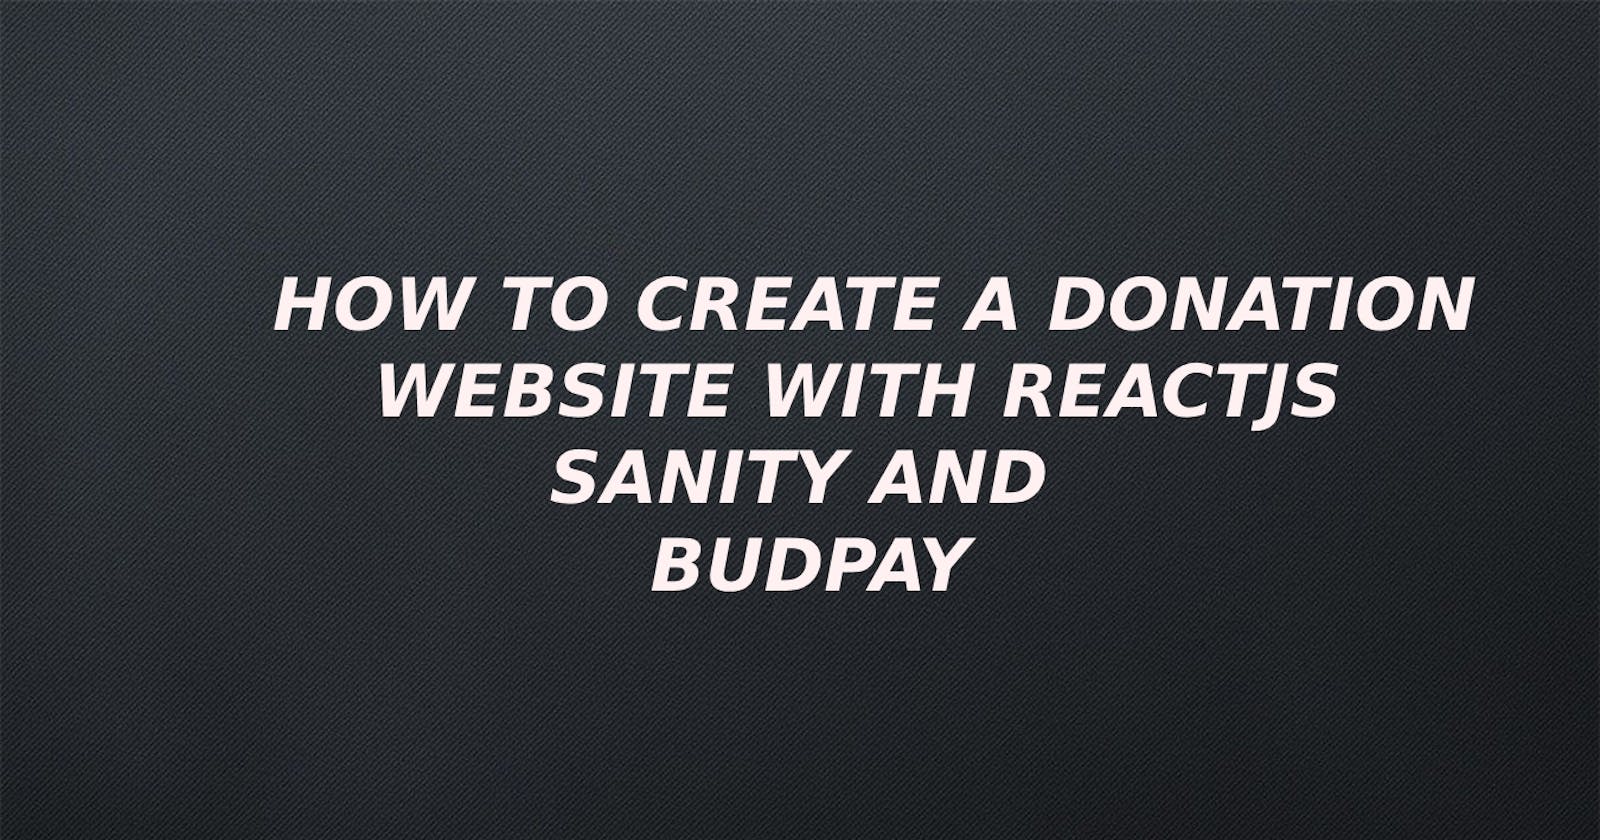 How to Create a Donation Website with ReactJS, Sanity, and BudPay: A Step-by-Step Guide